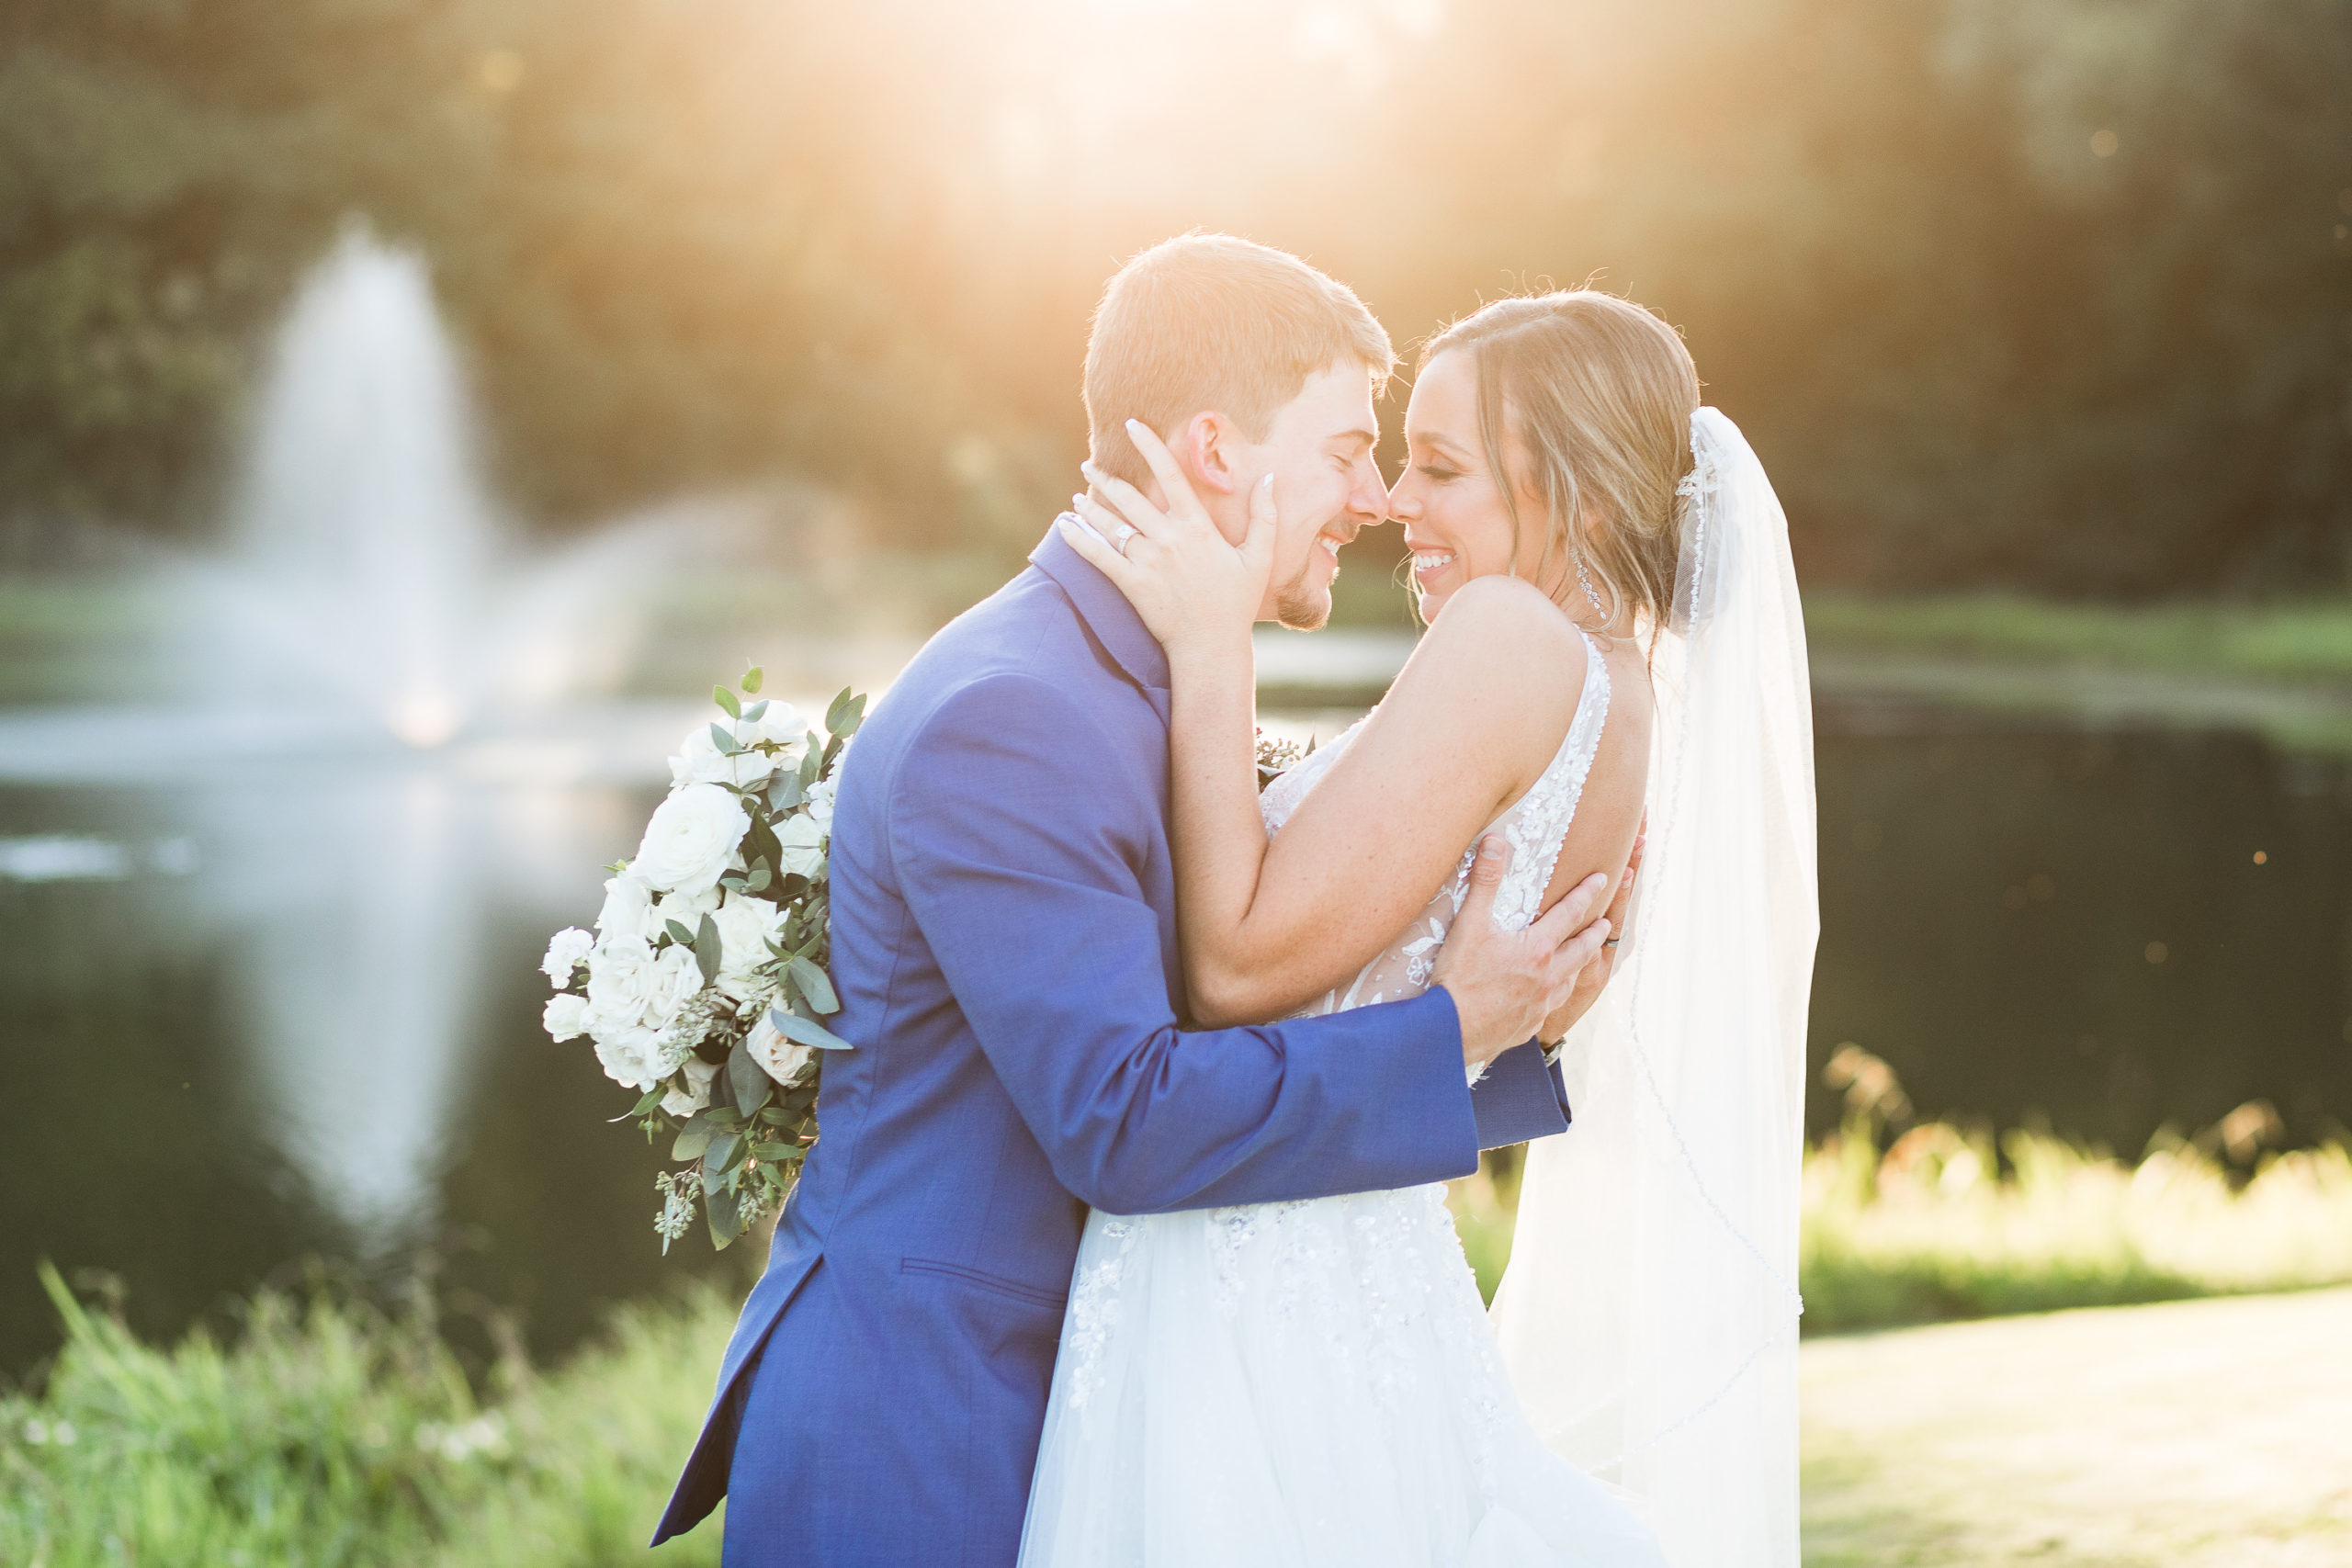 Bride and groom gaze lovingly at one another during golden hour, nose to nose